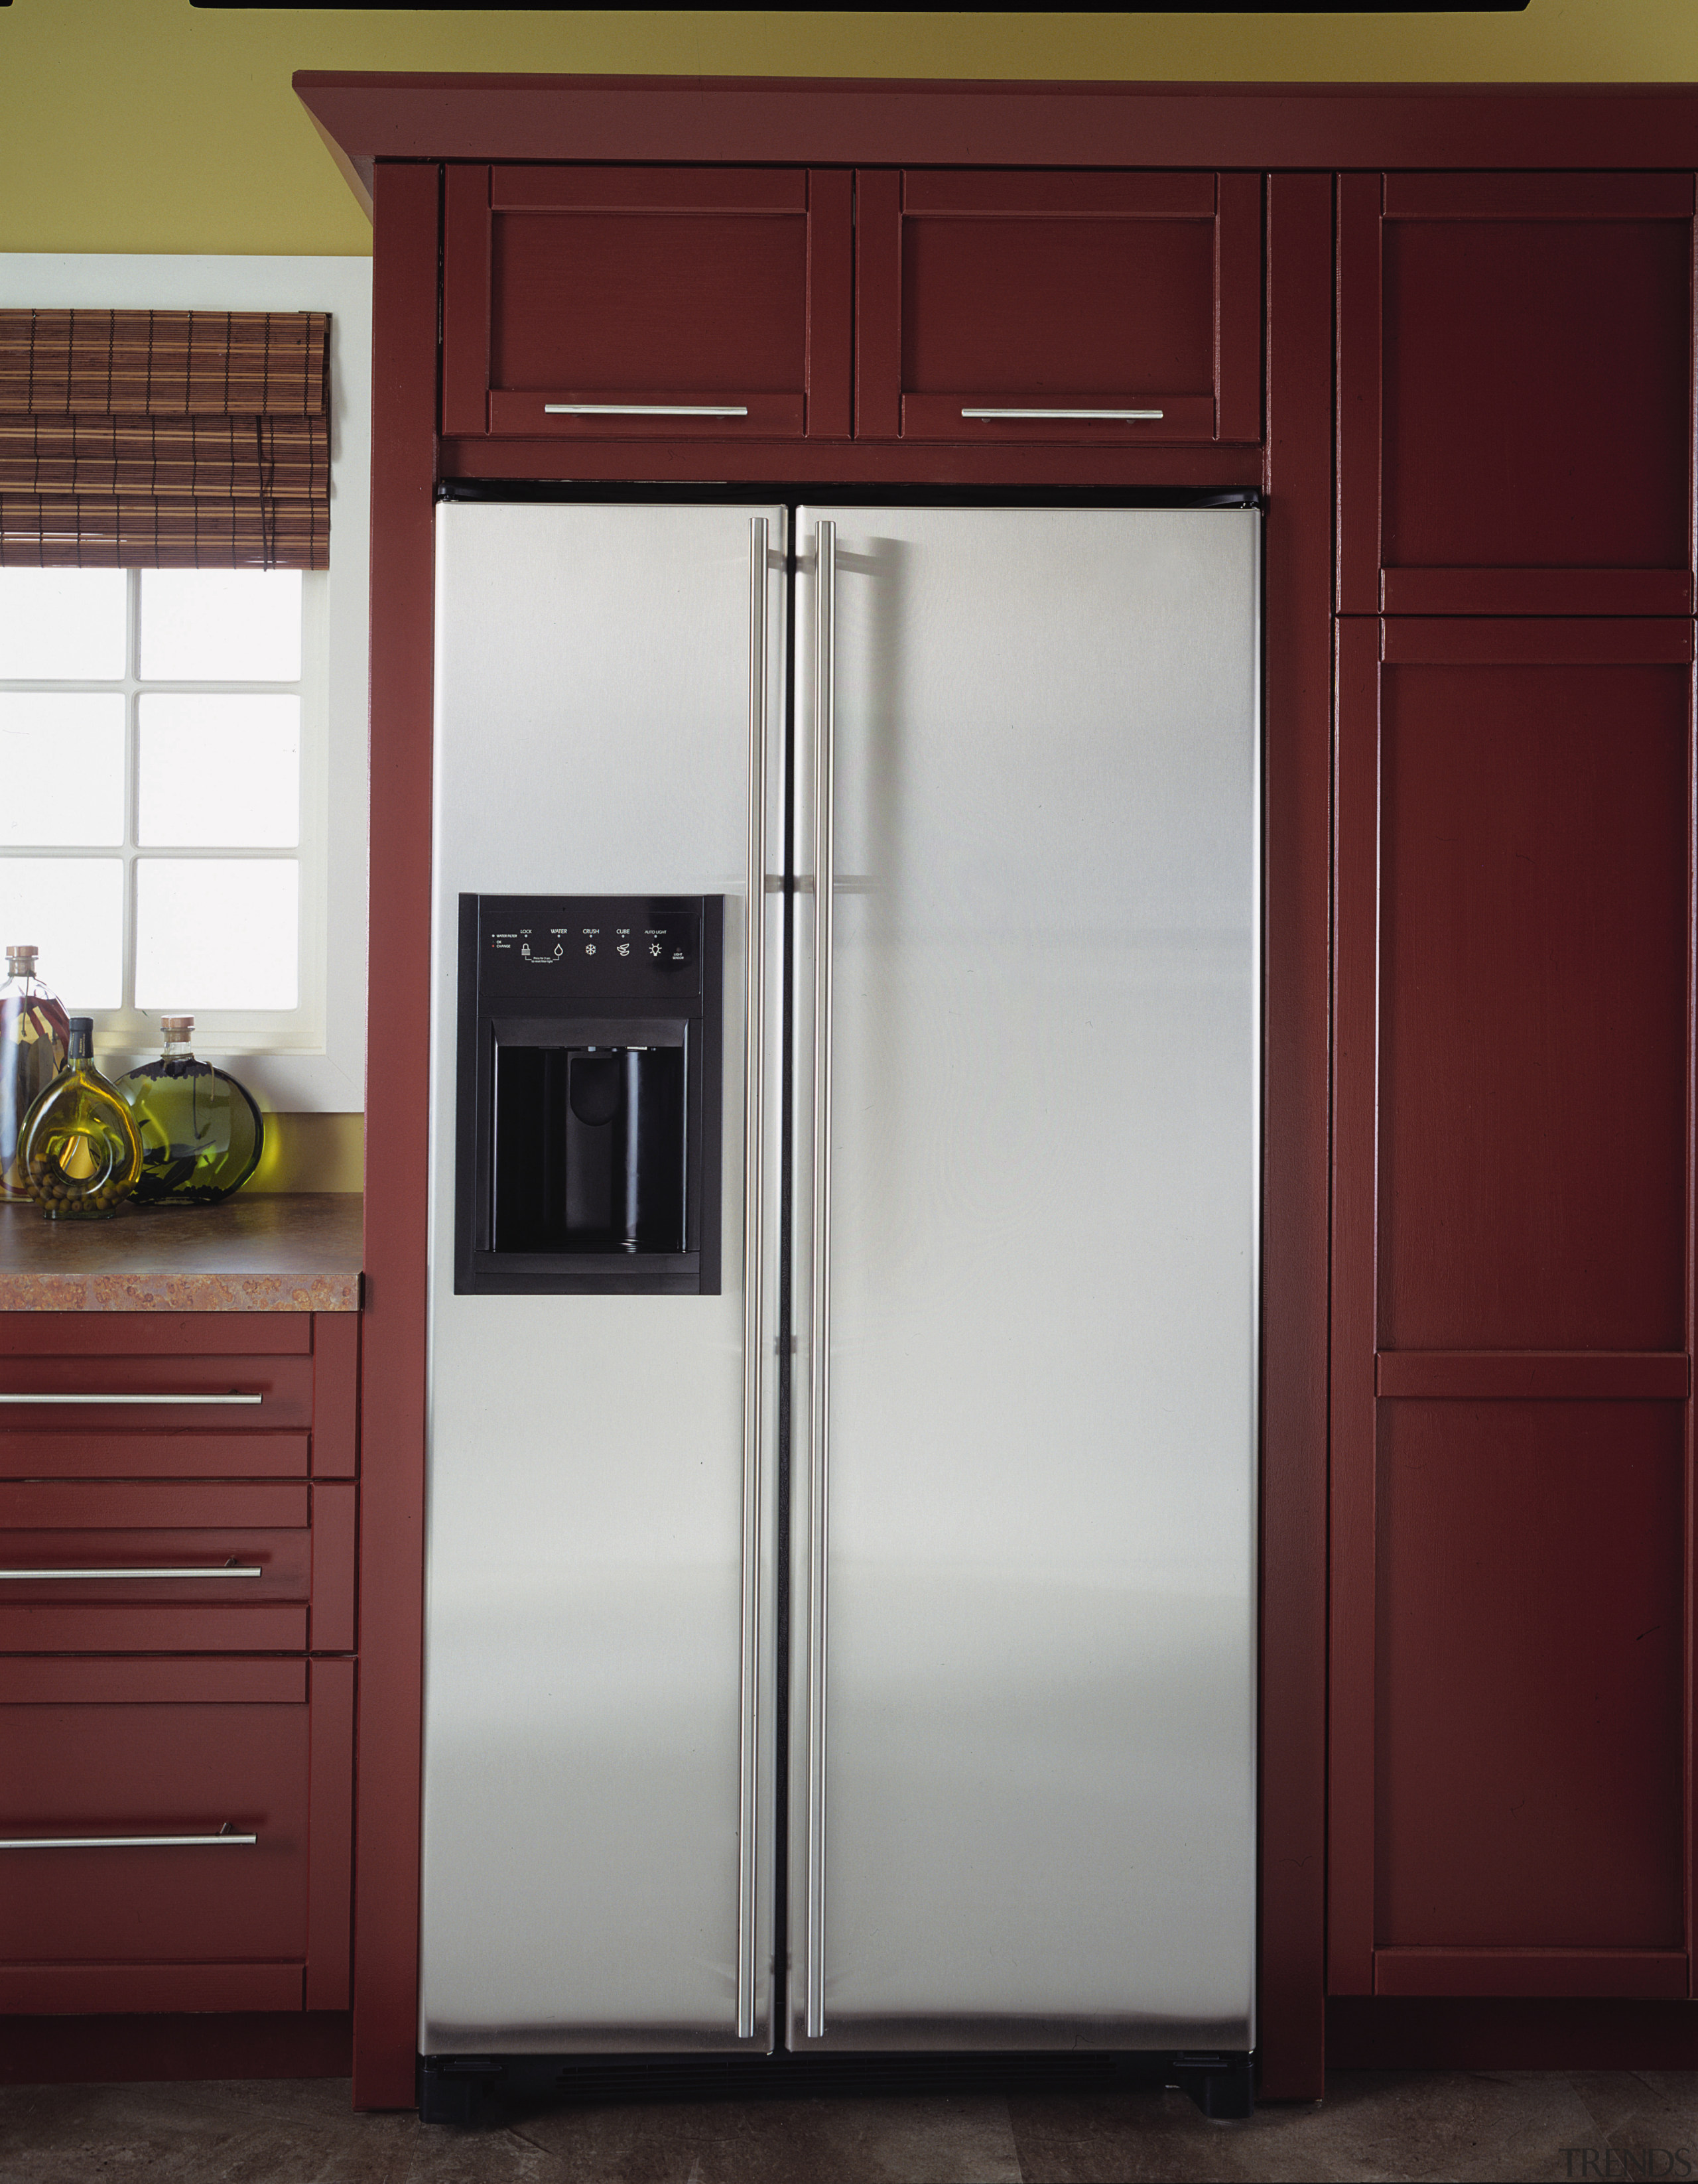 An example of attractive and practical fridges and cabinetry, home appliance, kitchen, kitchen appliance, major appliance, product, refrigerator, red, gray